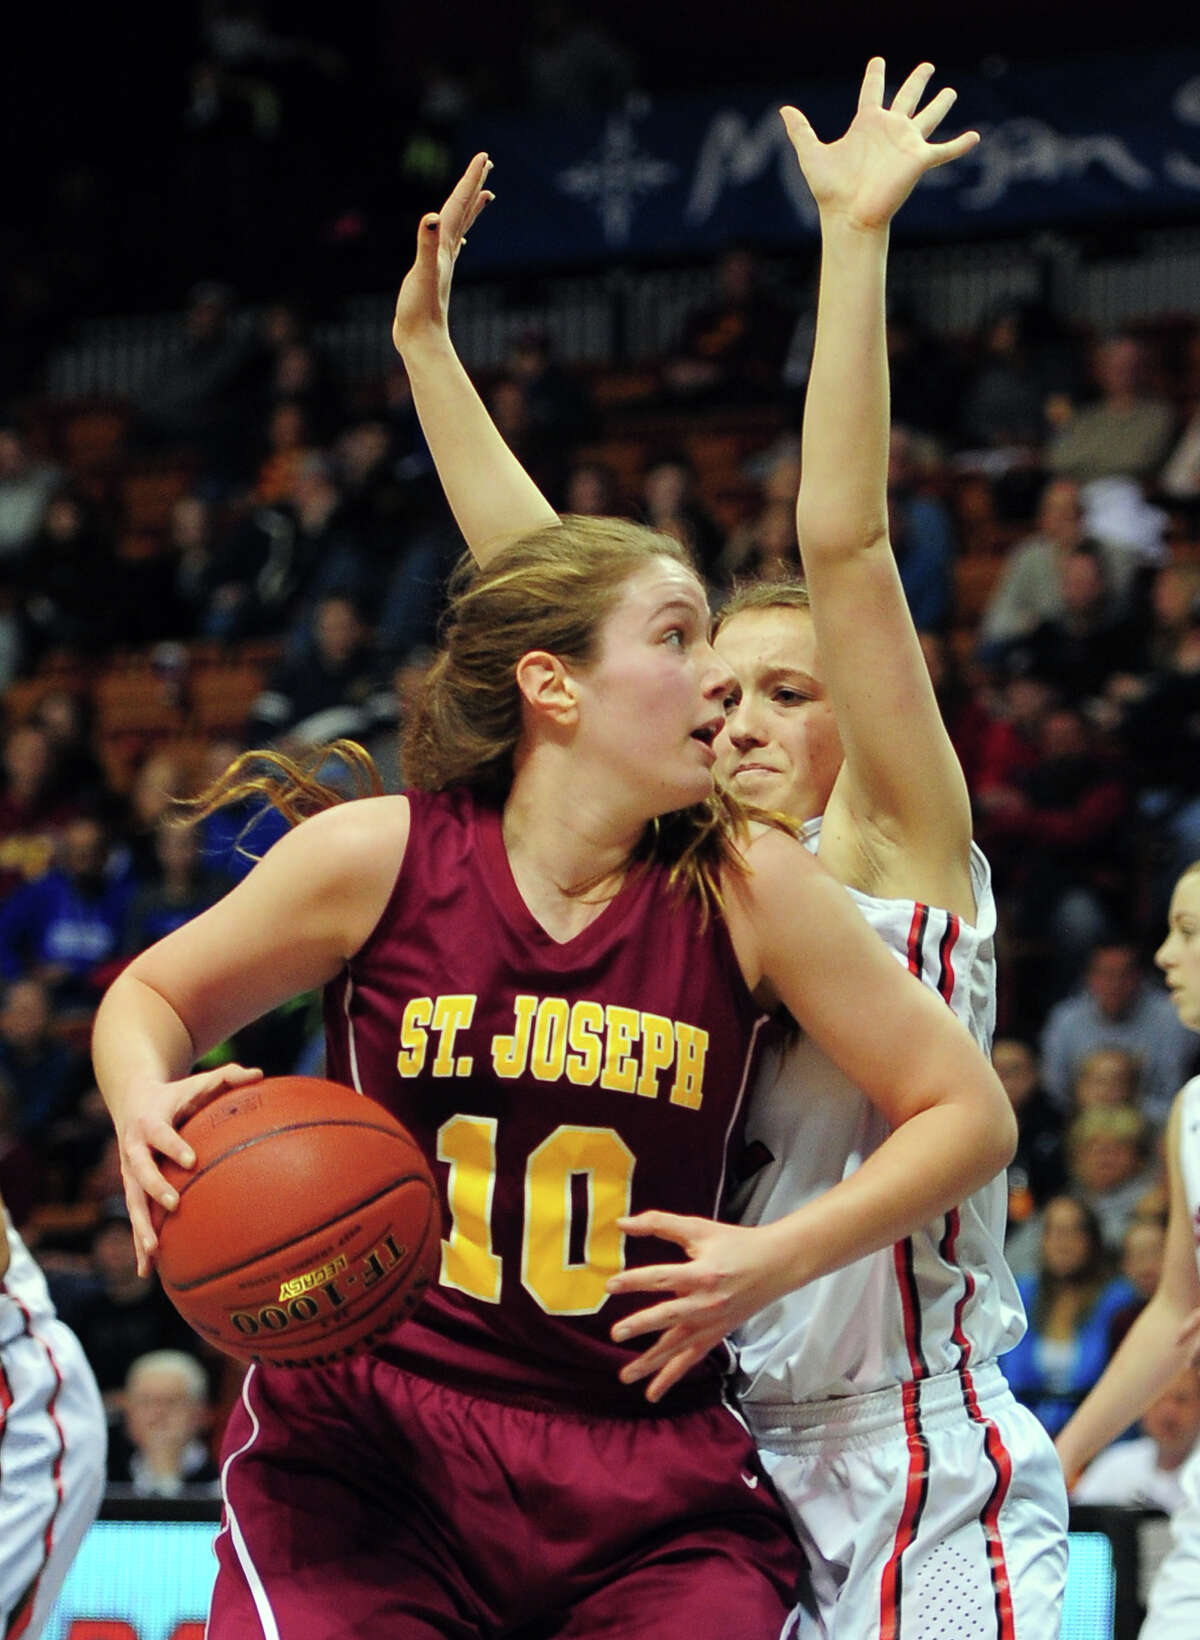 St. Joseph's Bridget Sharnick tries to get around Theresa Quinn, right, during CIAC State Girls Basketball Tournament action at Mohegan Sun in Uncasville, Conn., on Saturday Mar. 21, 2015.